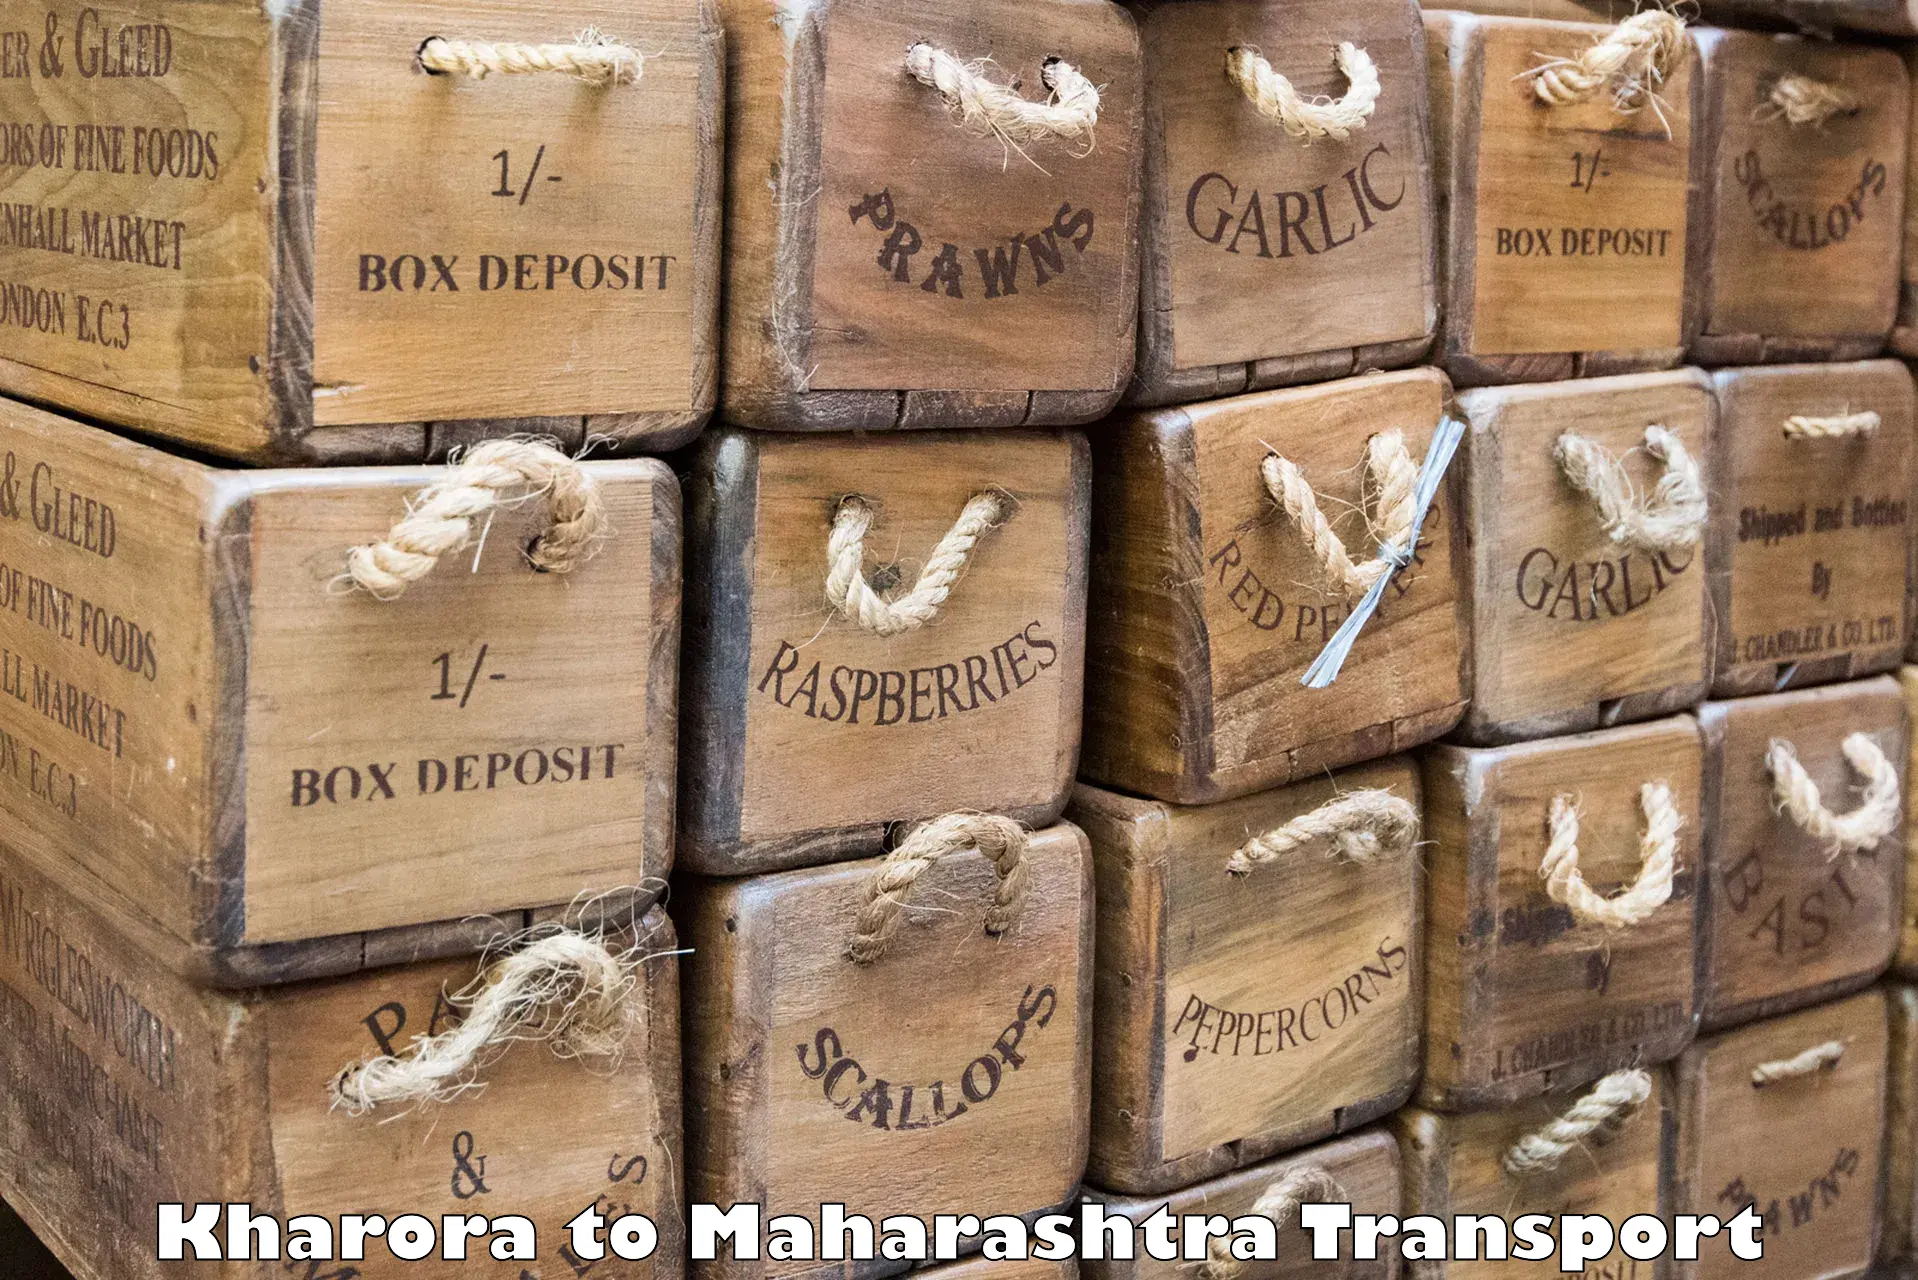 Air freight transport services Kharora to Symbiosis International Pune